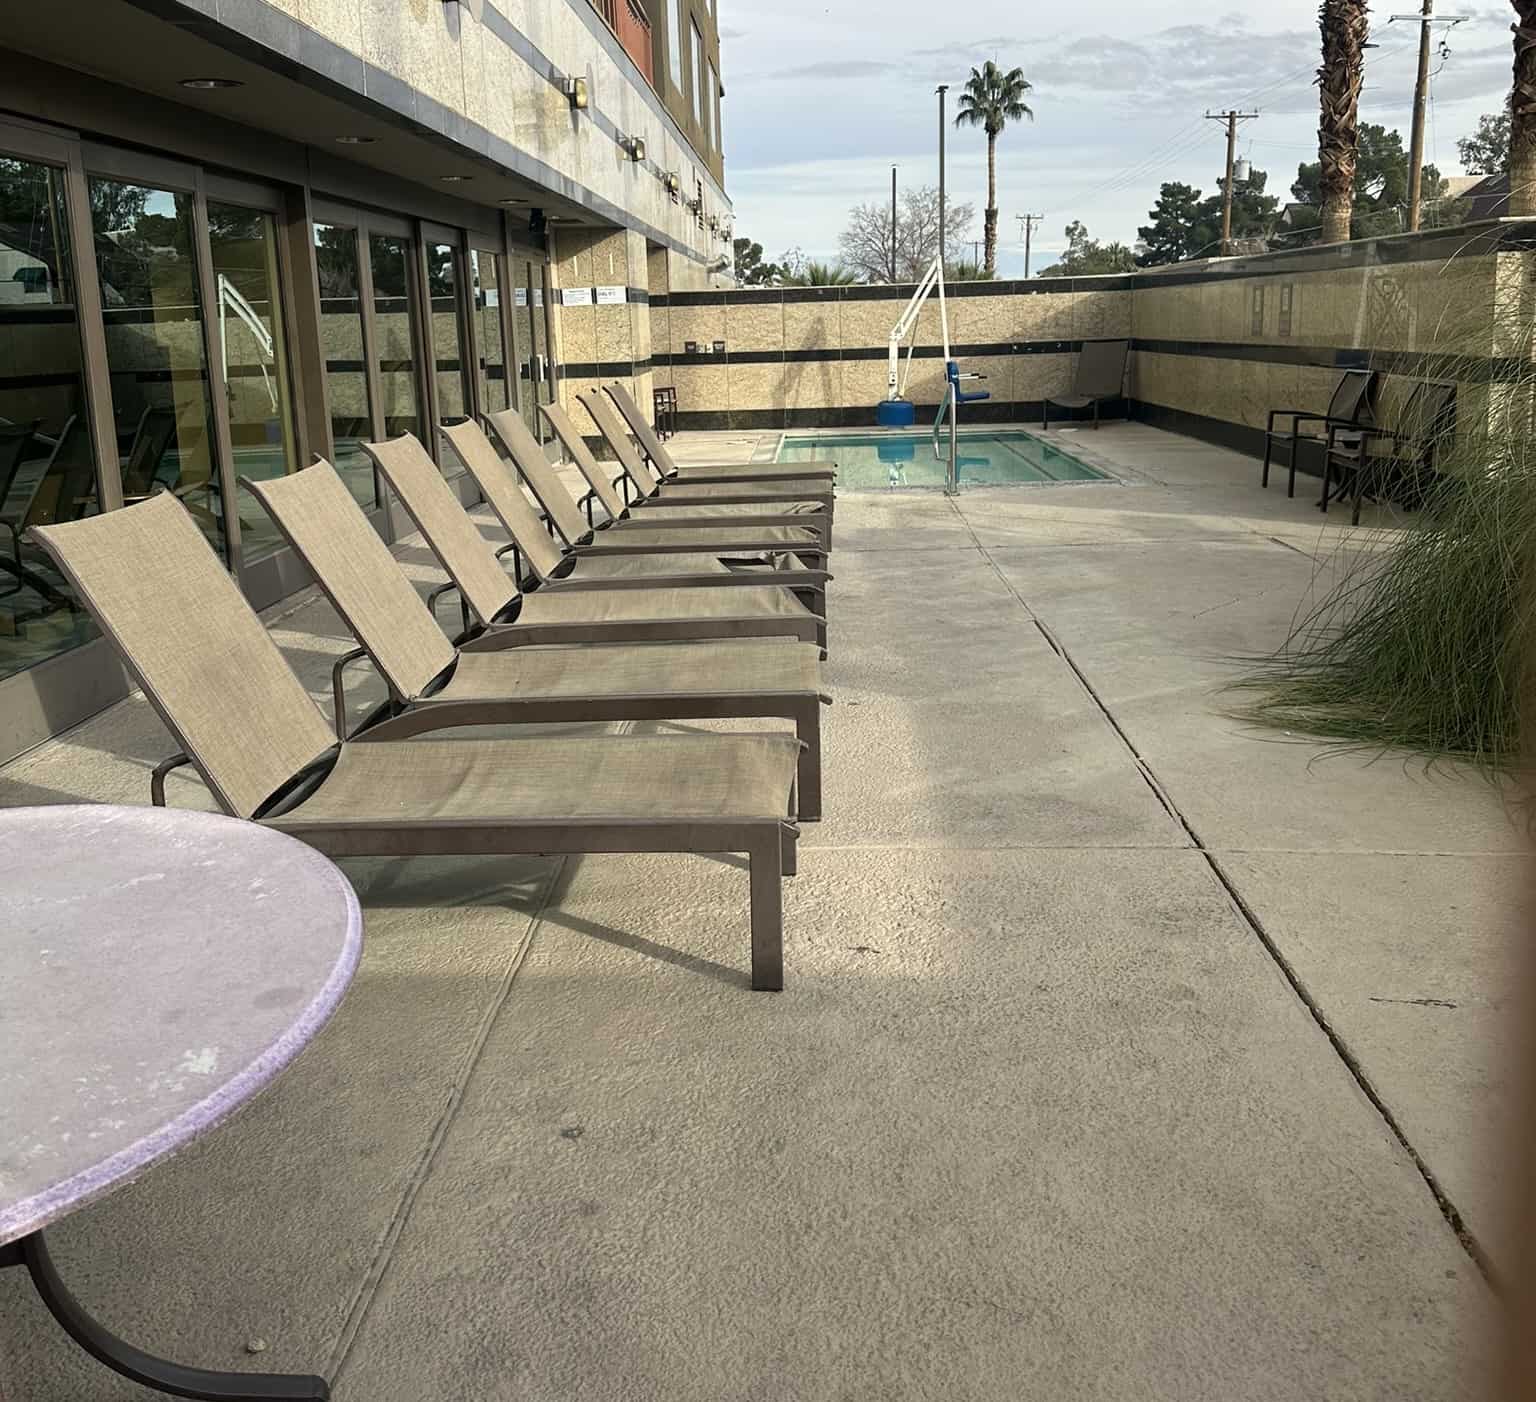 Loungers lined up in front of the outdoor hot tub.